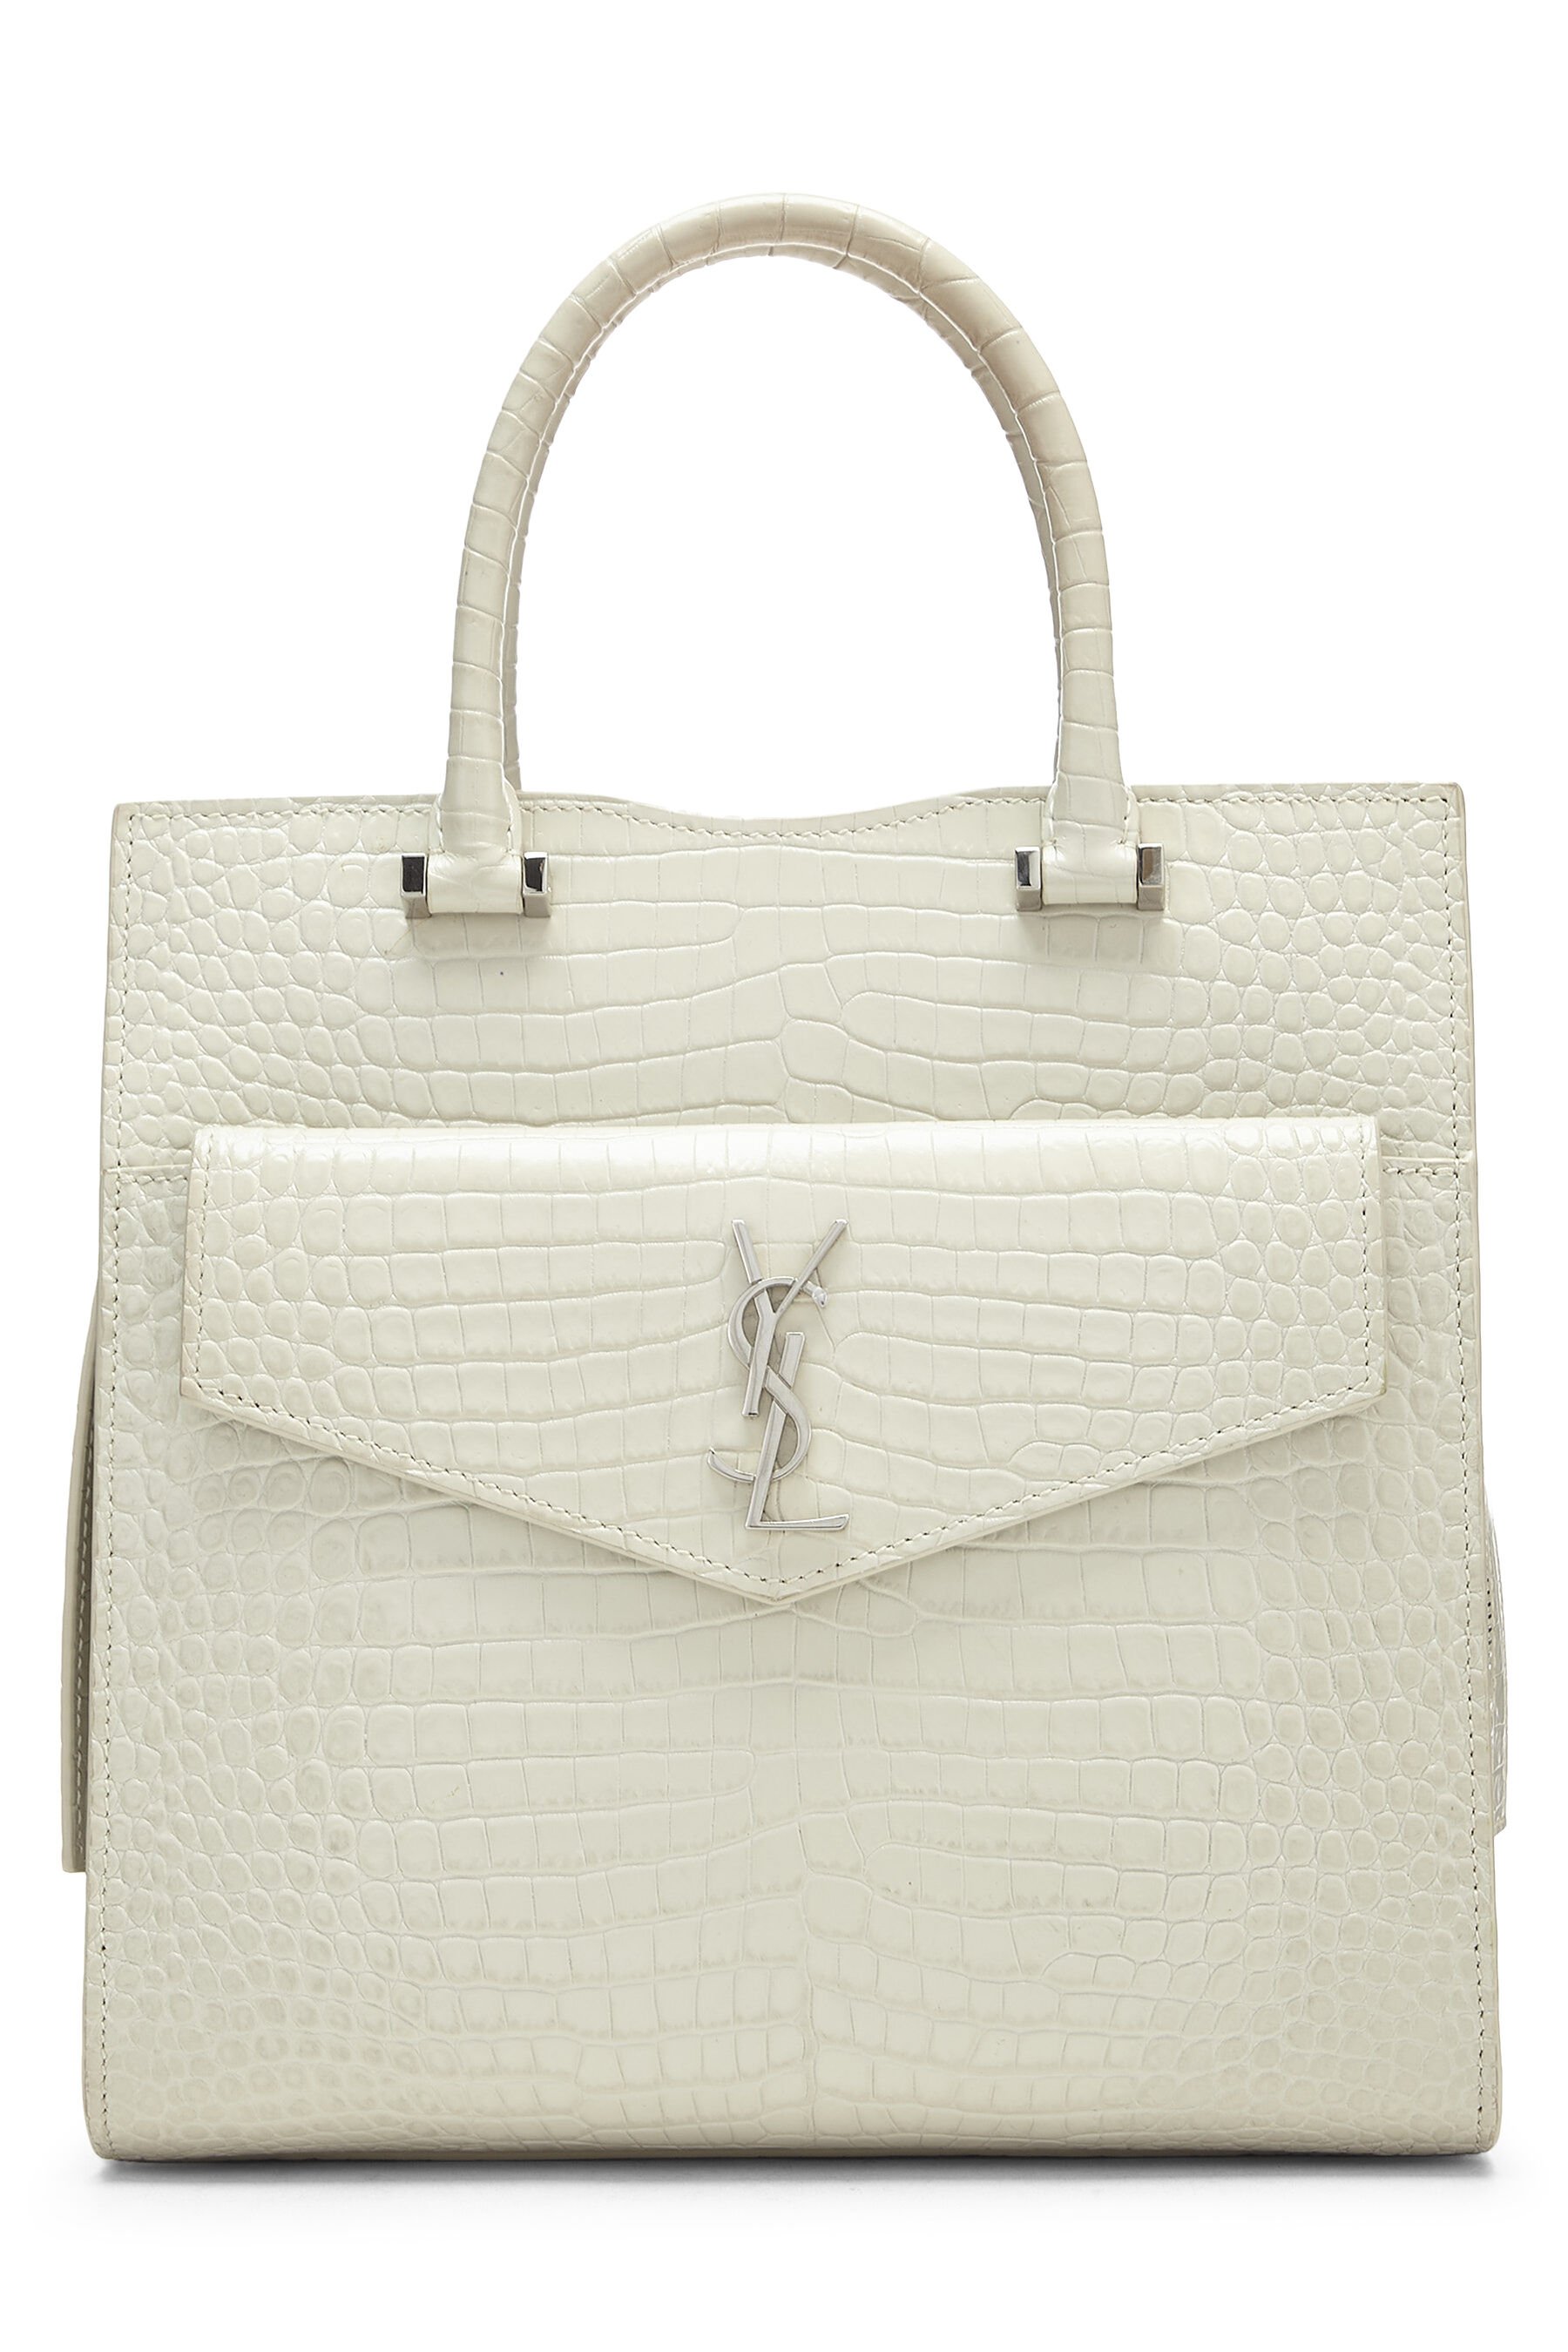 YSL White Embossed Uptown Tote Small QTB2JLILWH000